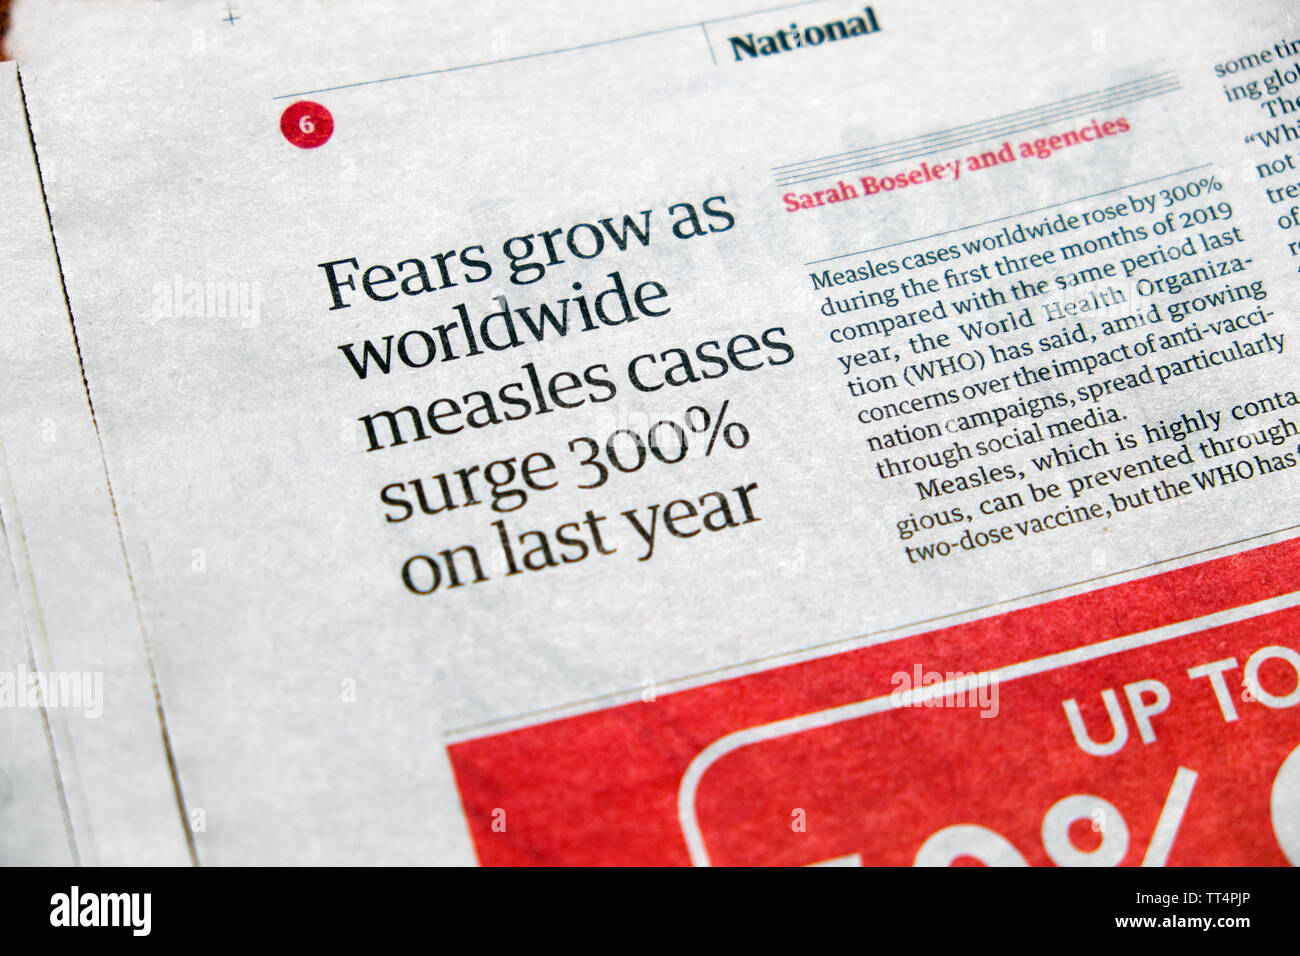 'Fears grow as worldwide measles cases surge 300% on last year' newspaper headline article cutting in London England UK Britain  2019 Stock Photo